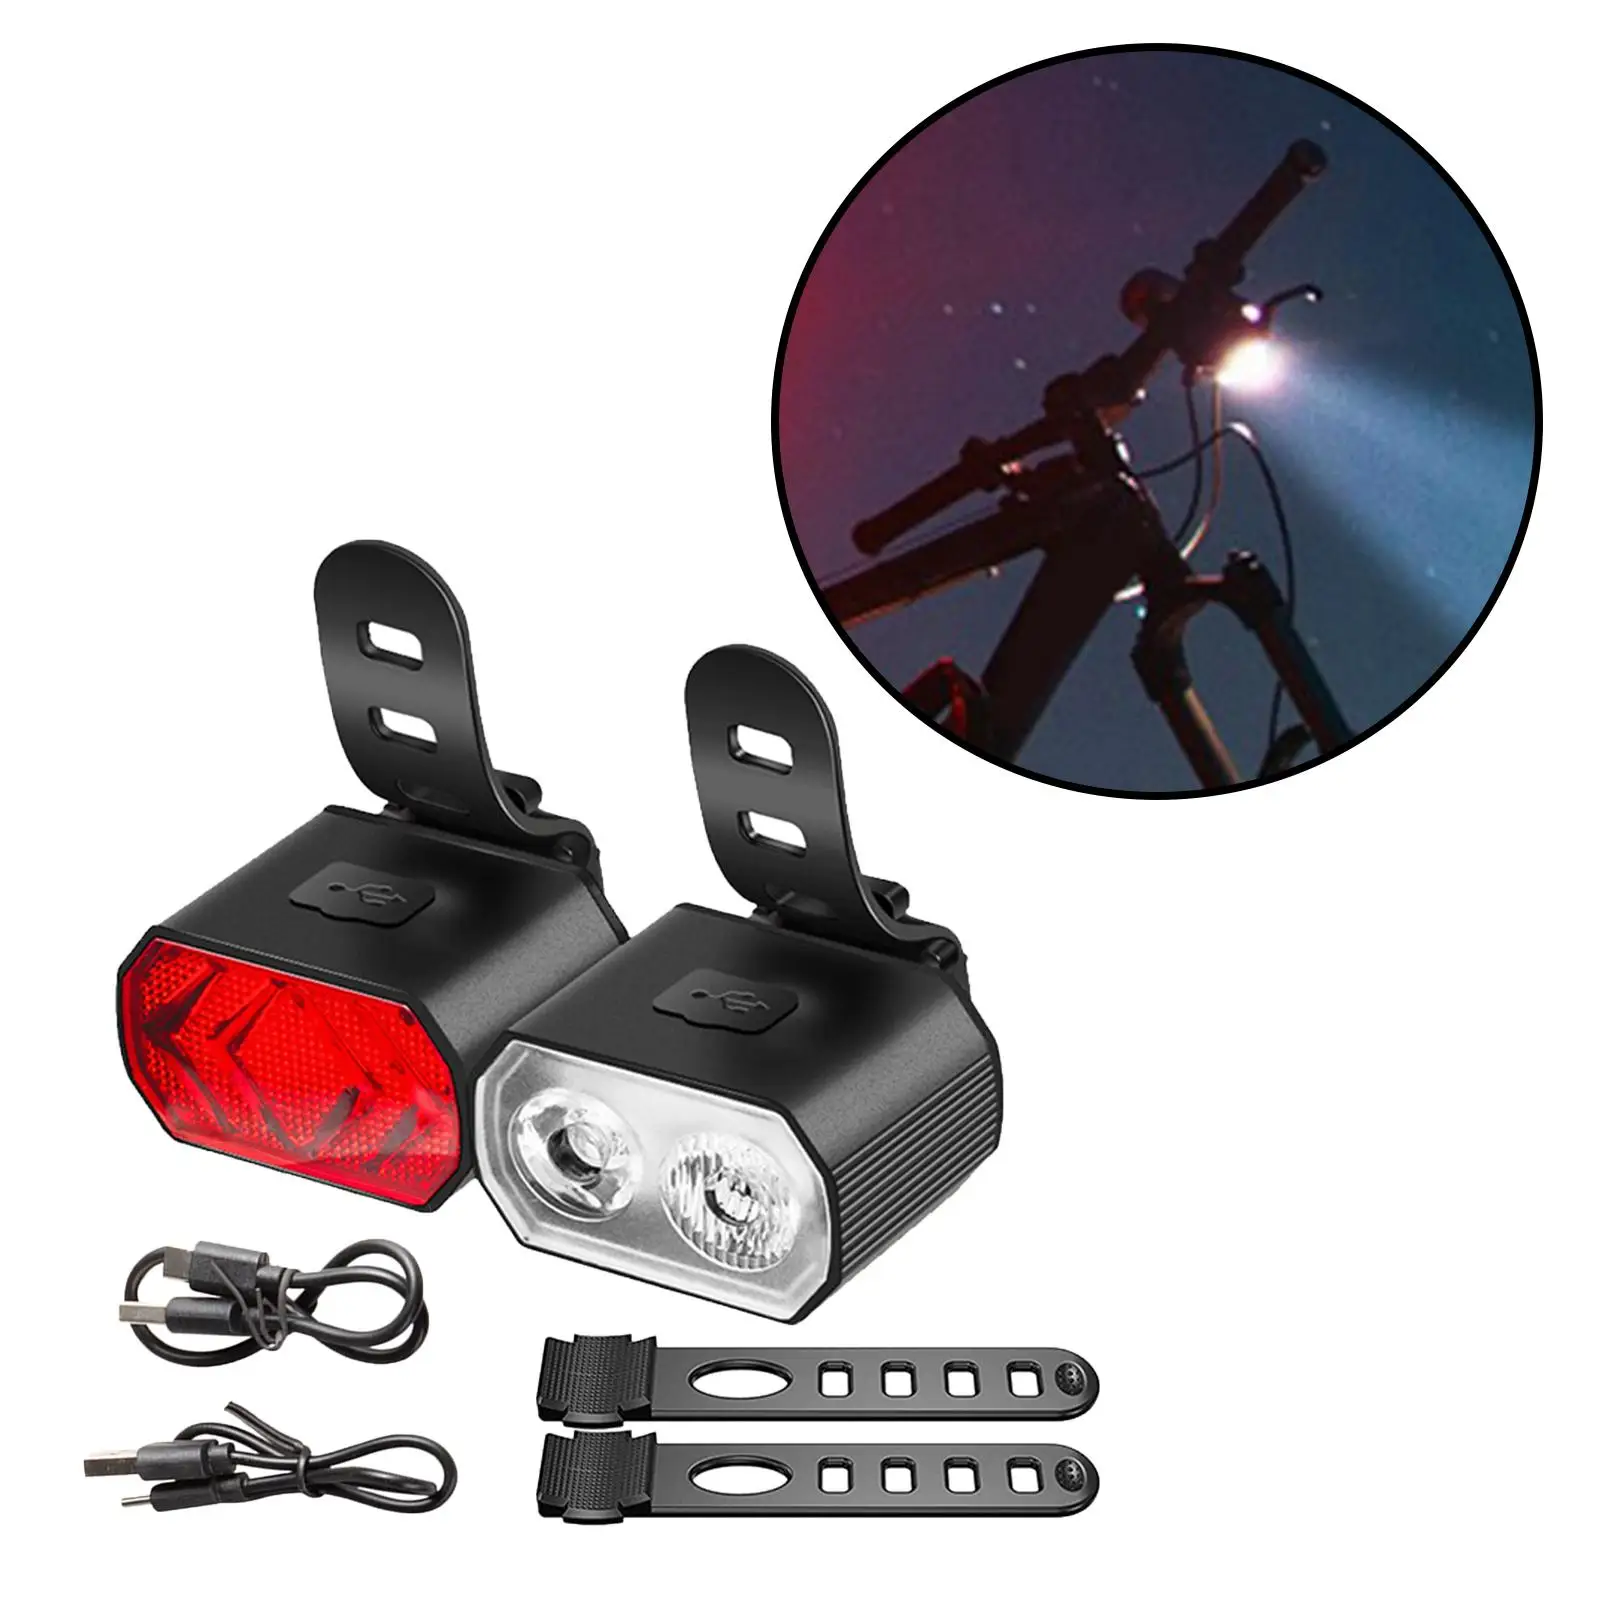 Bicycle Lights Bike Headlight Taillight Front Rear Light Rechargeable Cycling Lamp Aluminum Alloy Warning Lamp Bike Accessories